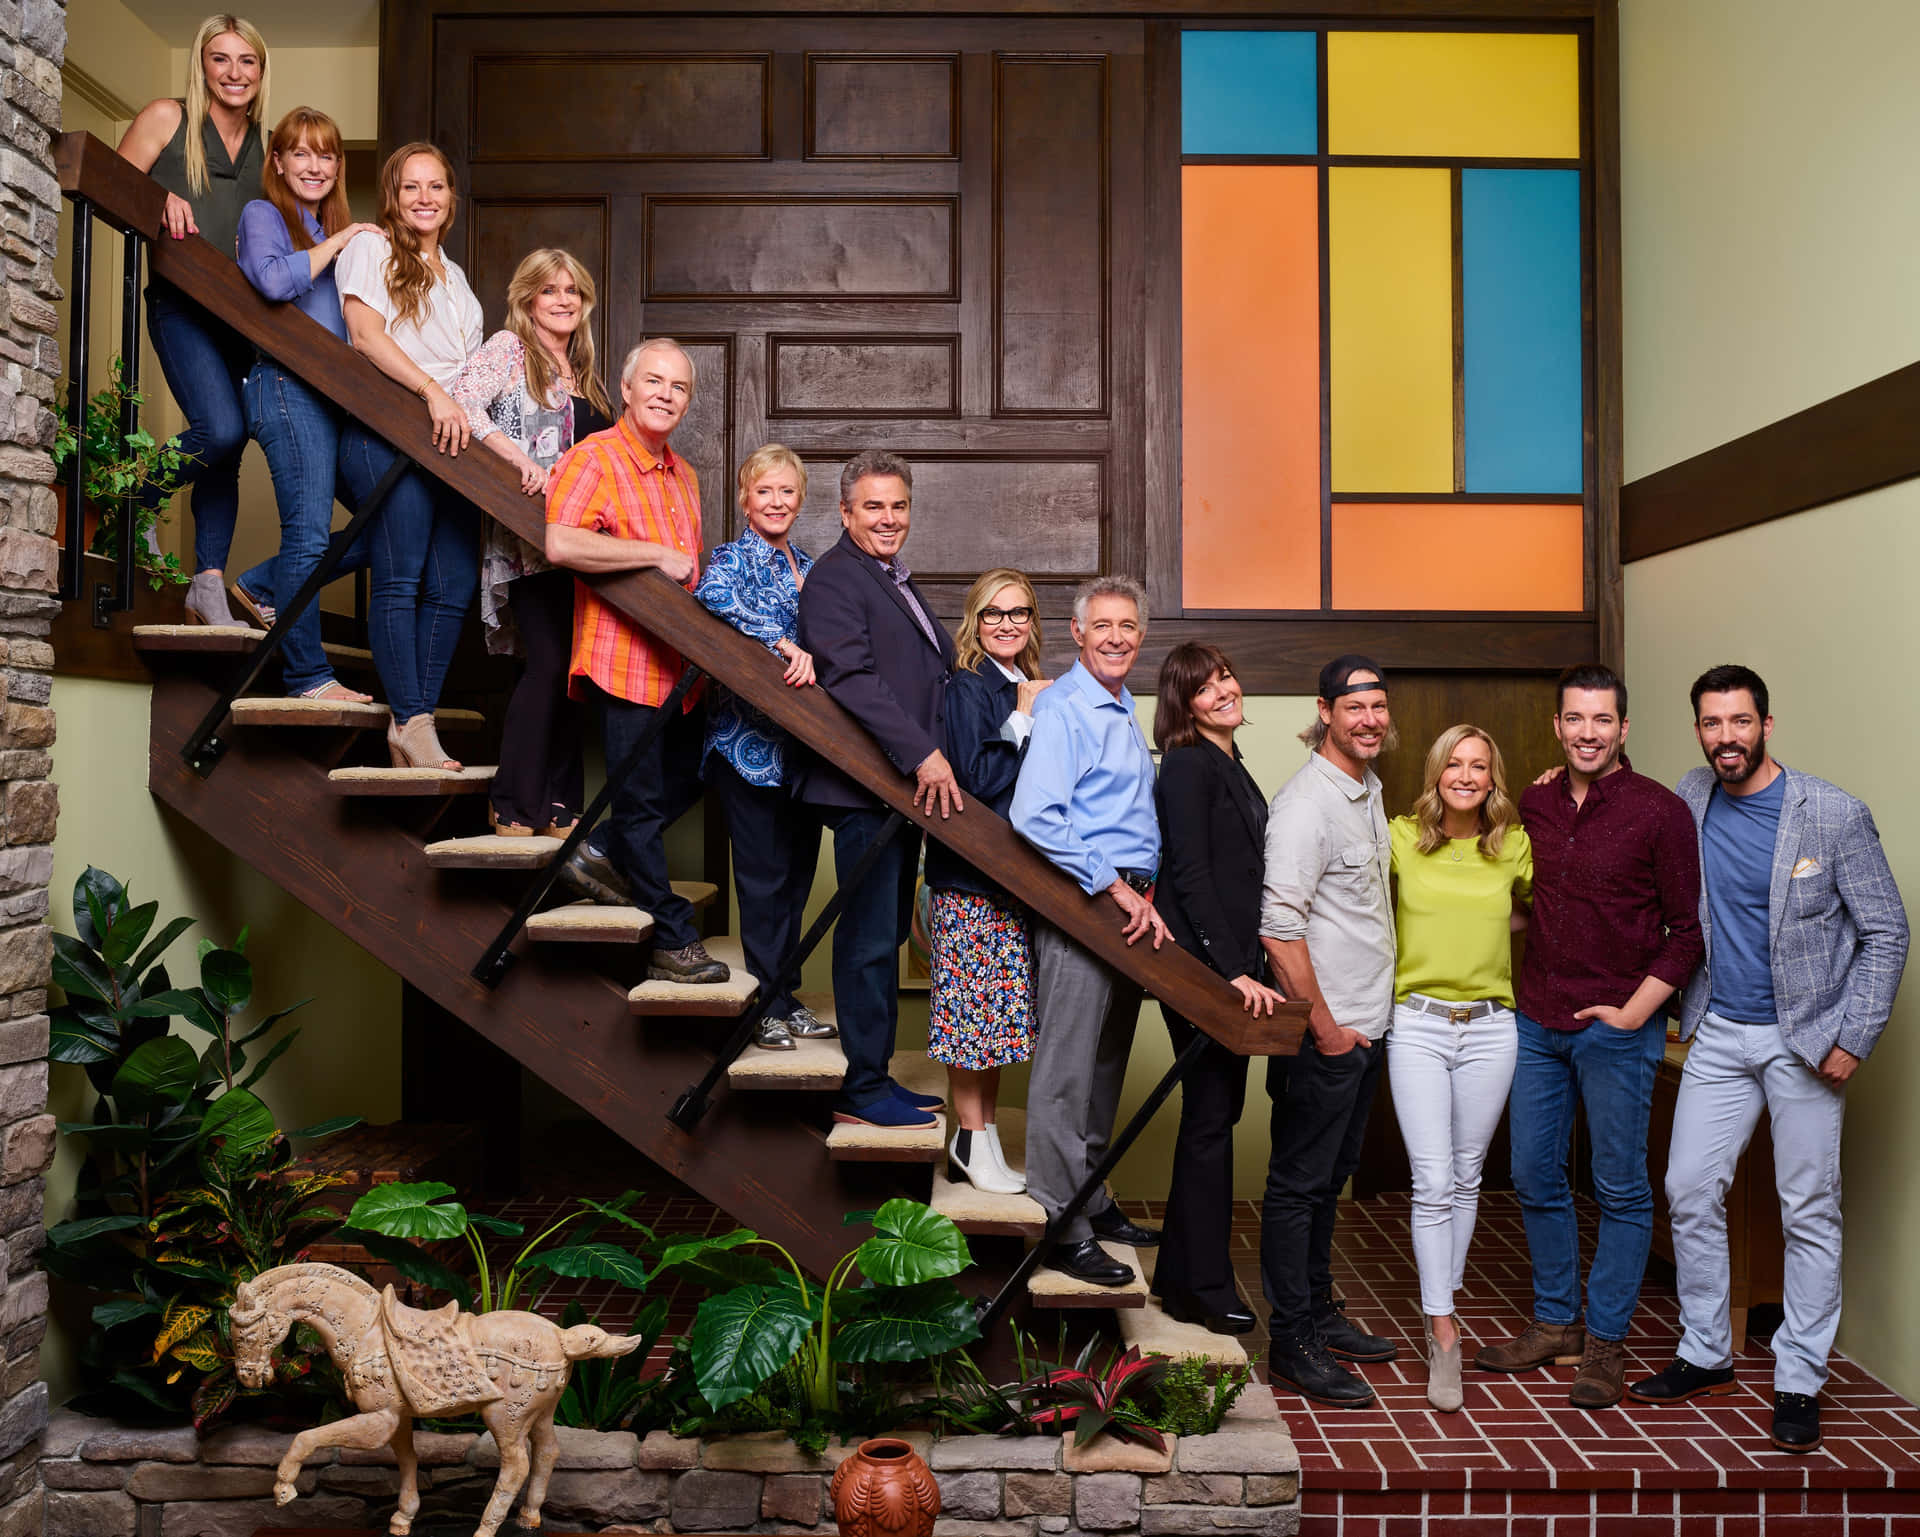 A Group Of People Standing On Stairs In A House Wallpaper